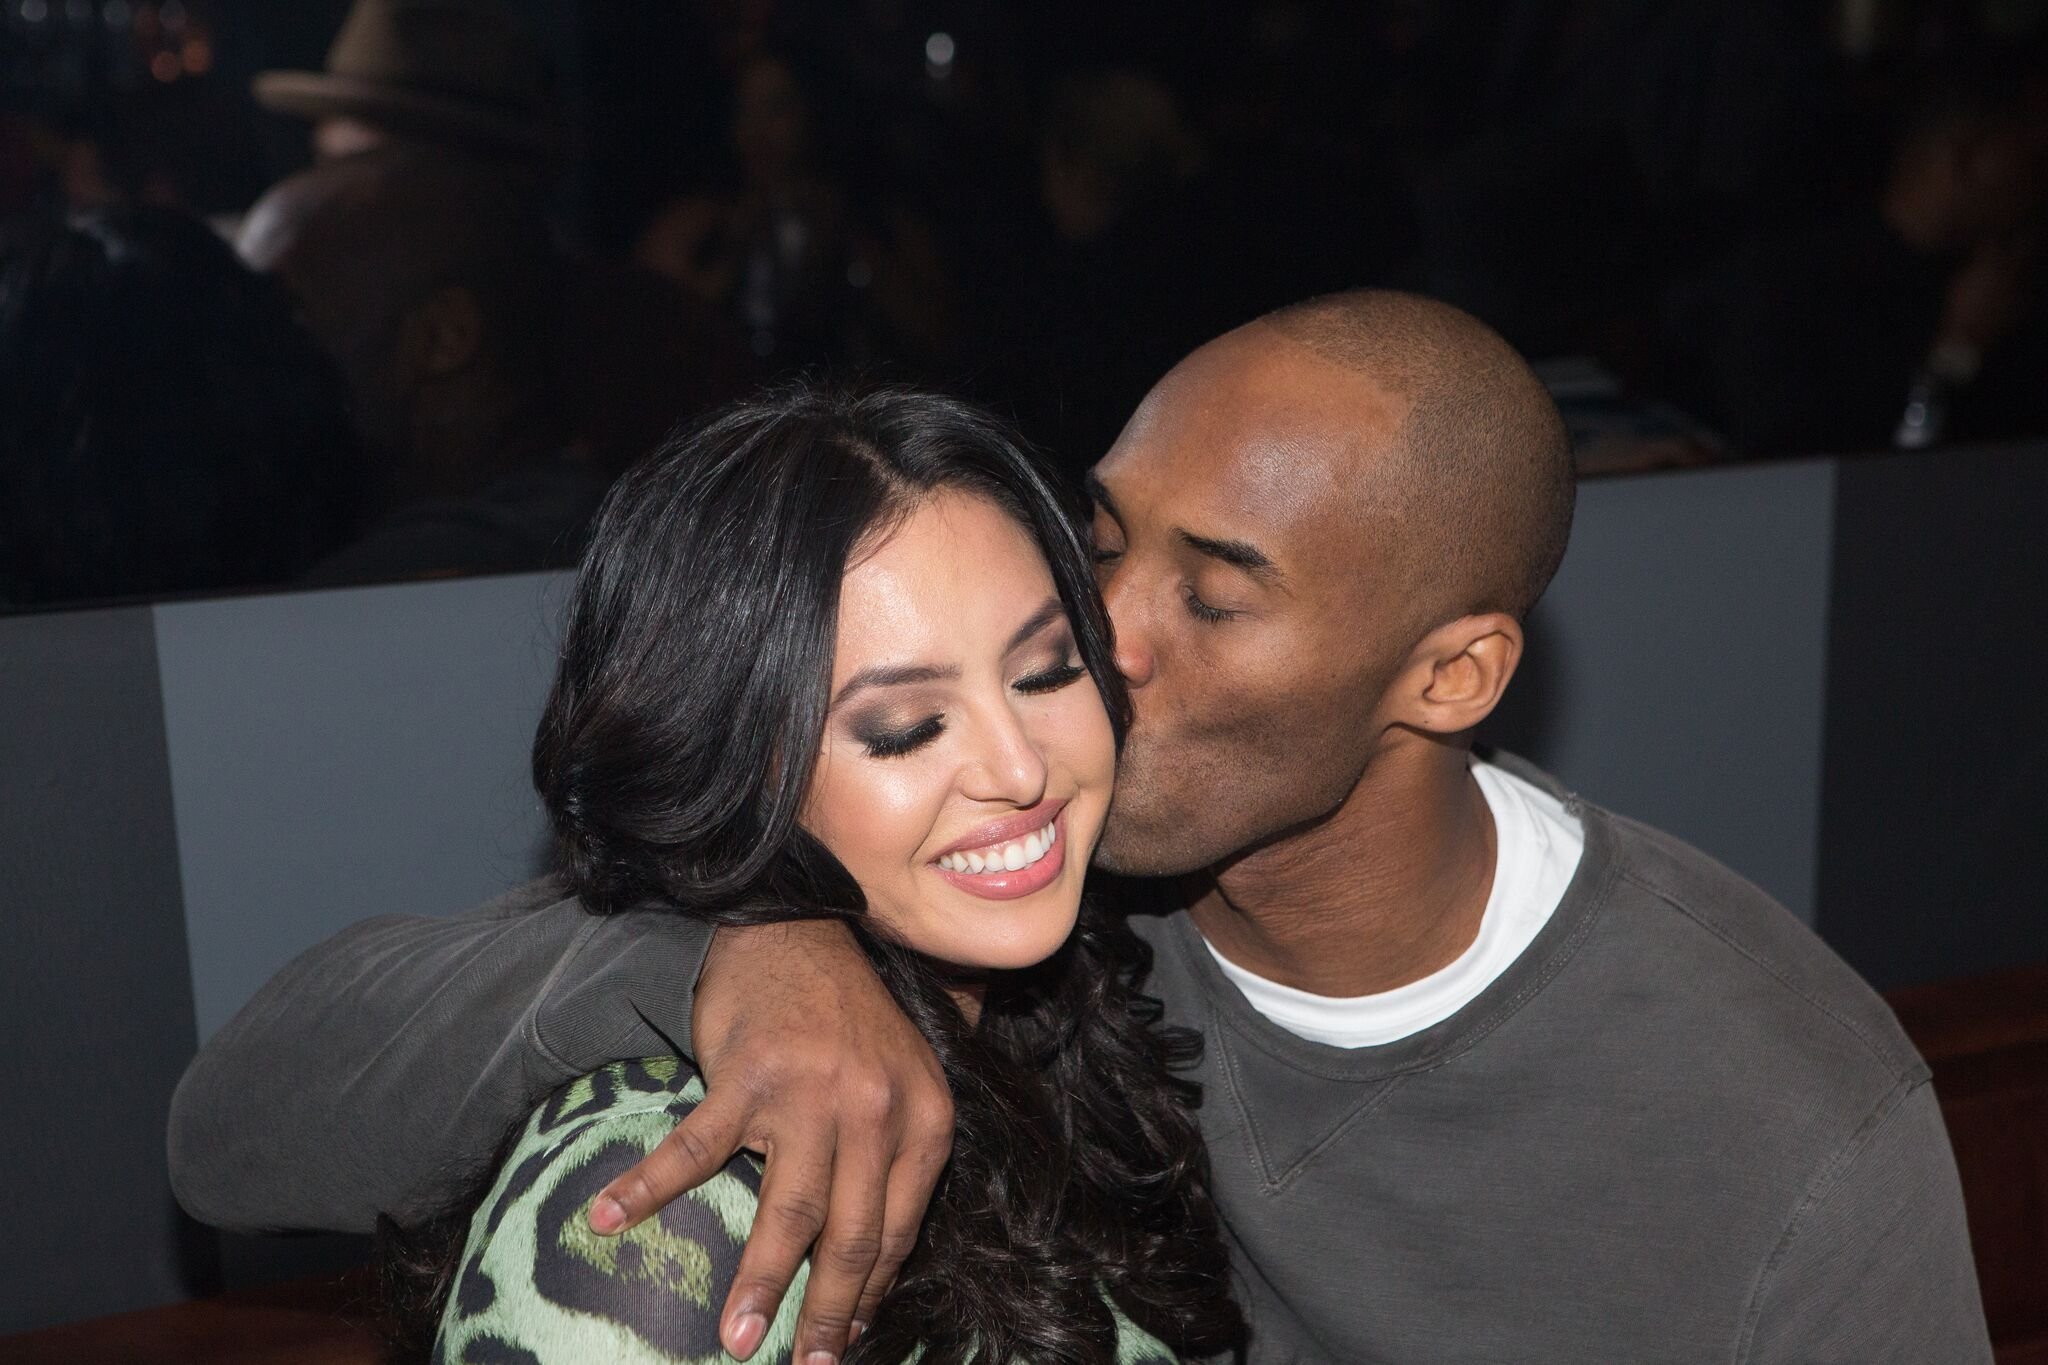  Vanessa Bryant and Kobe Bryant share a kiss during The Gentleman's Supper Club hosted by Chris Paul, Dwyane Wade and Carmelo Anthony honoring Kobe Bryant  | Getty Images